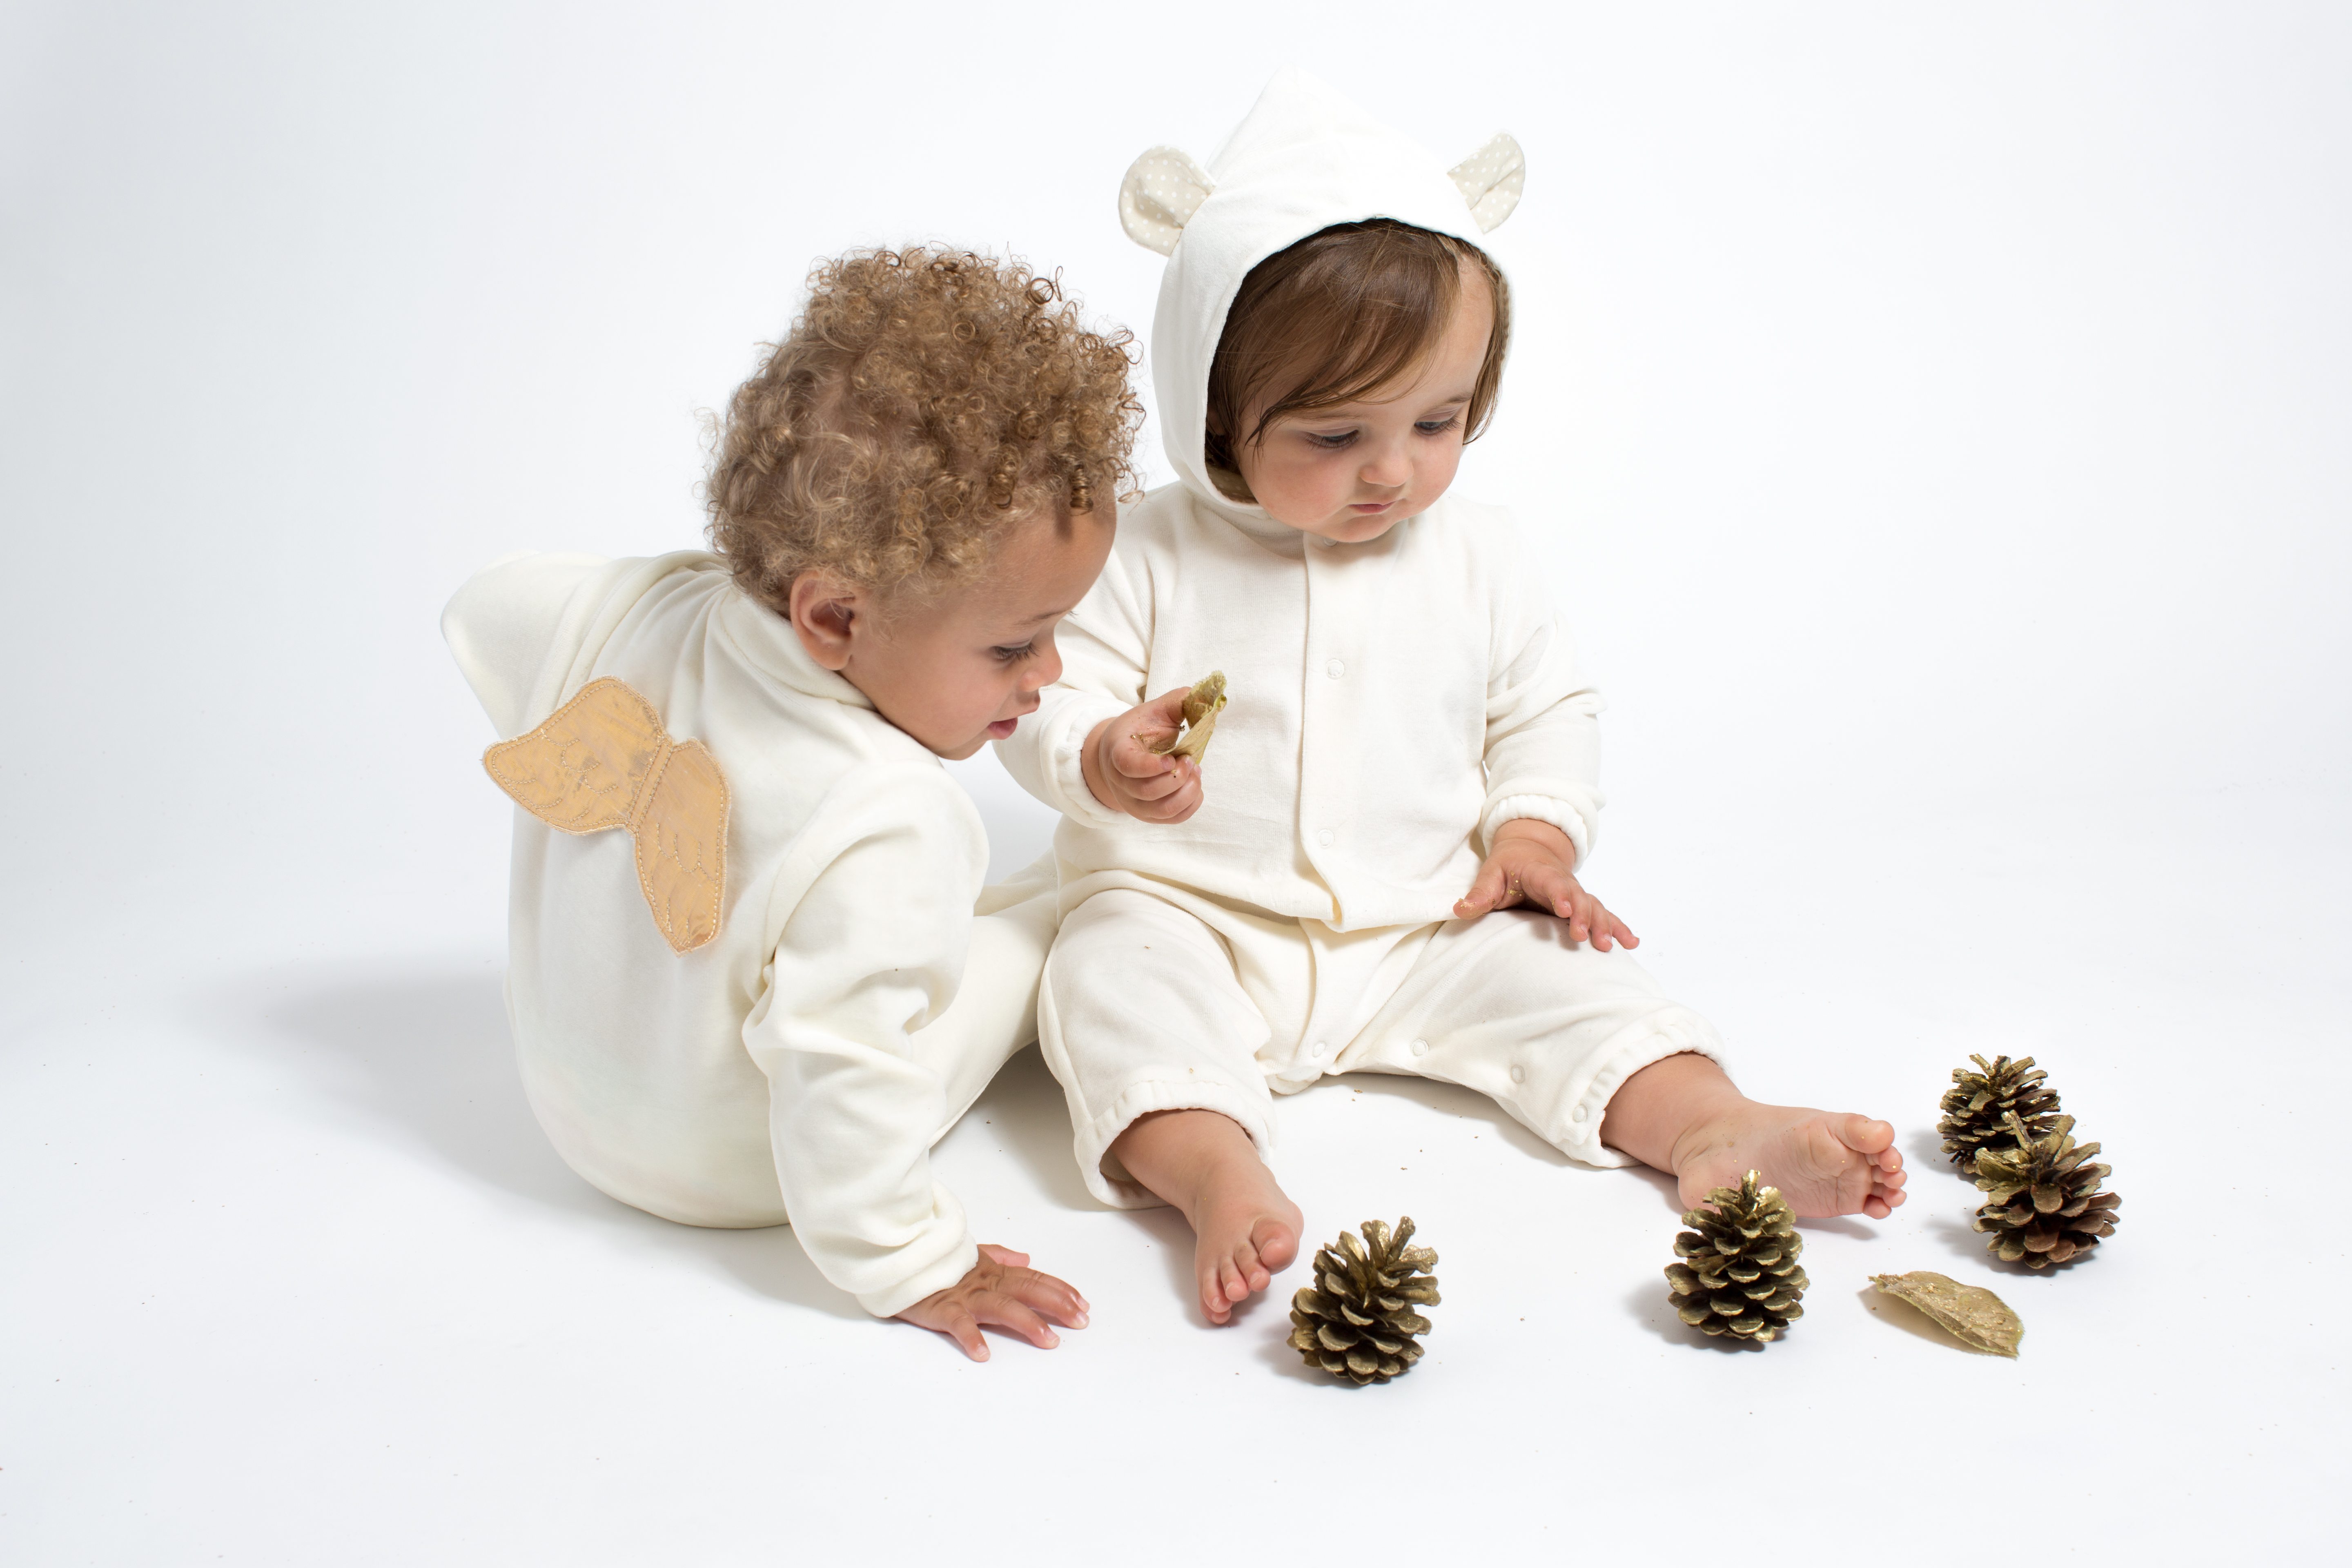 Marie-Chantal - AW15 - gold angel wing baby & cream bear suit baby